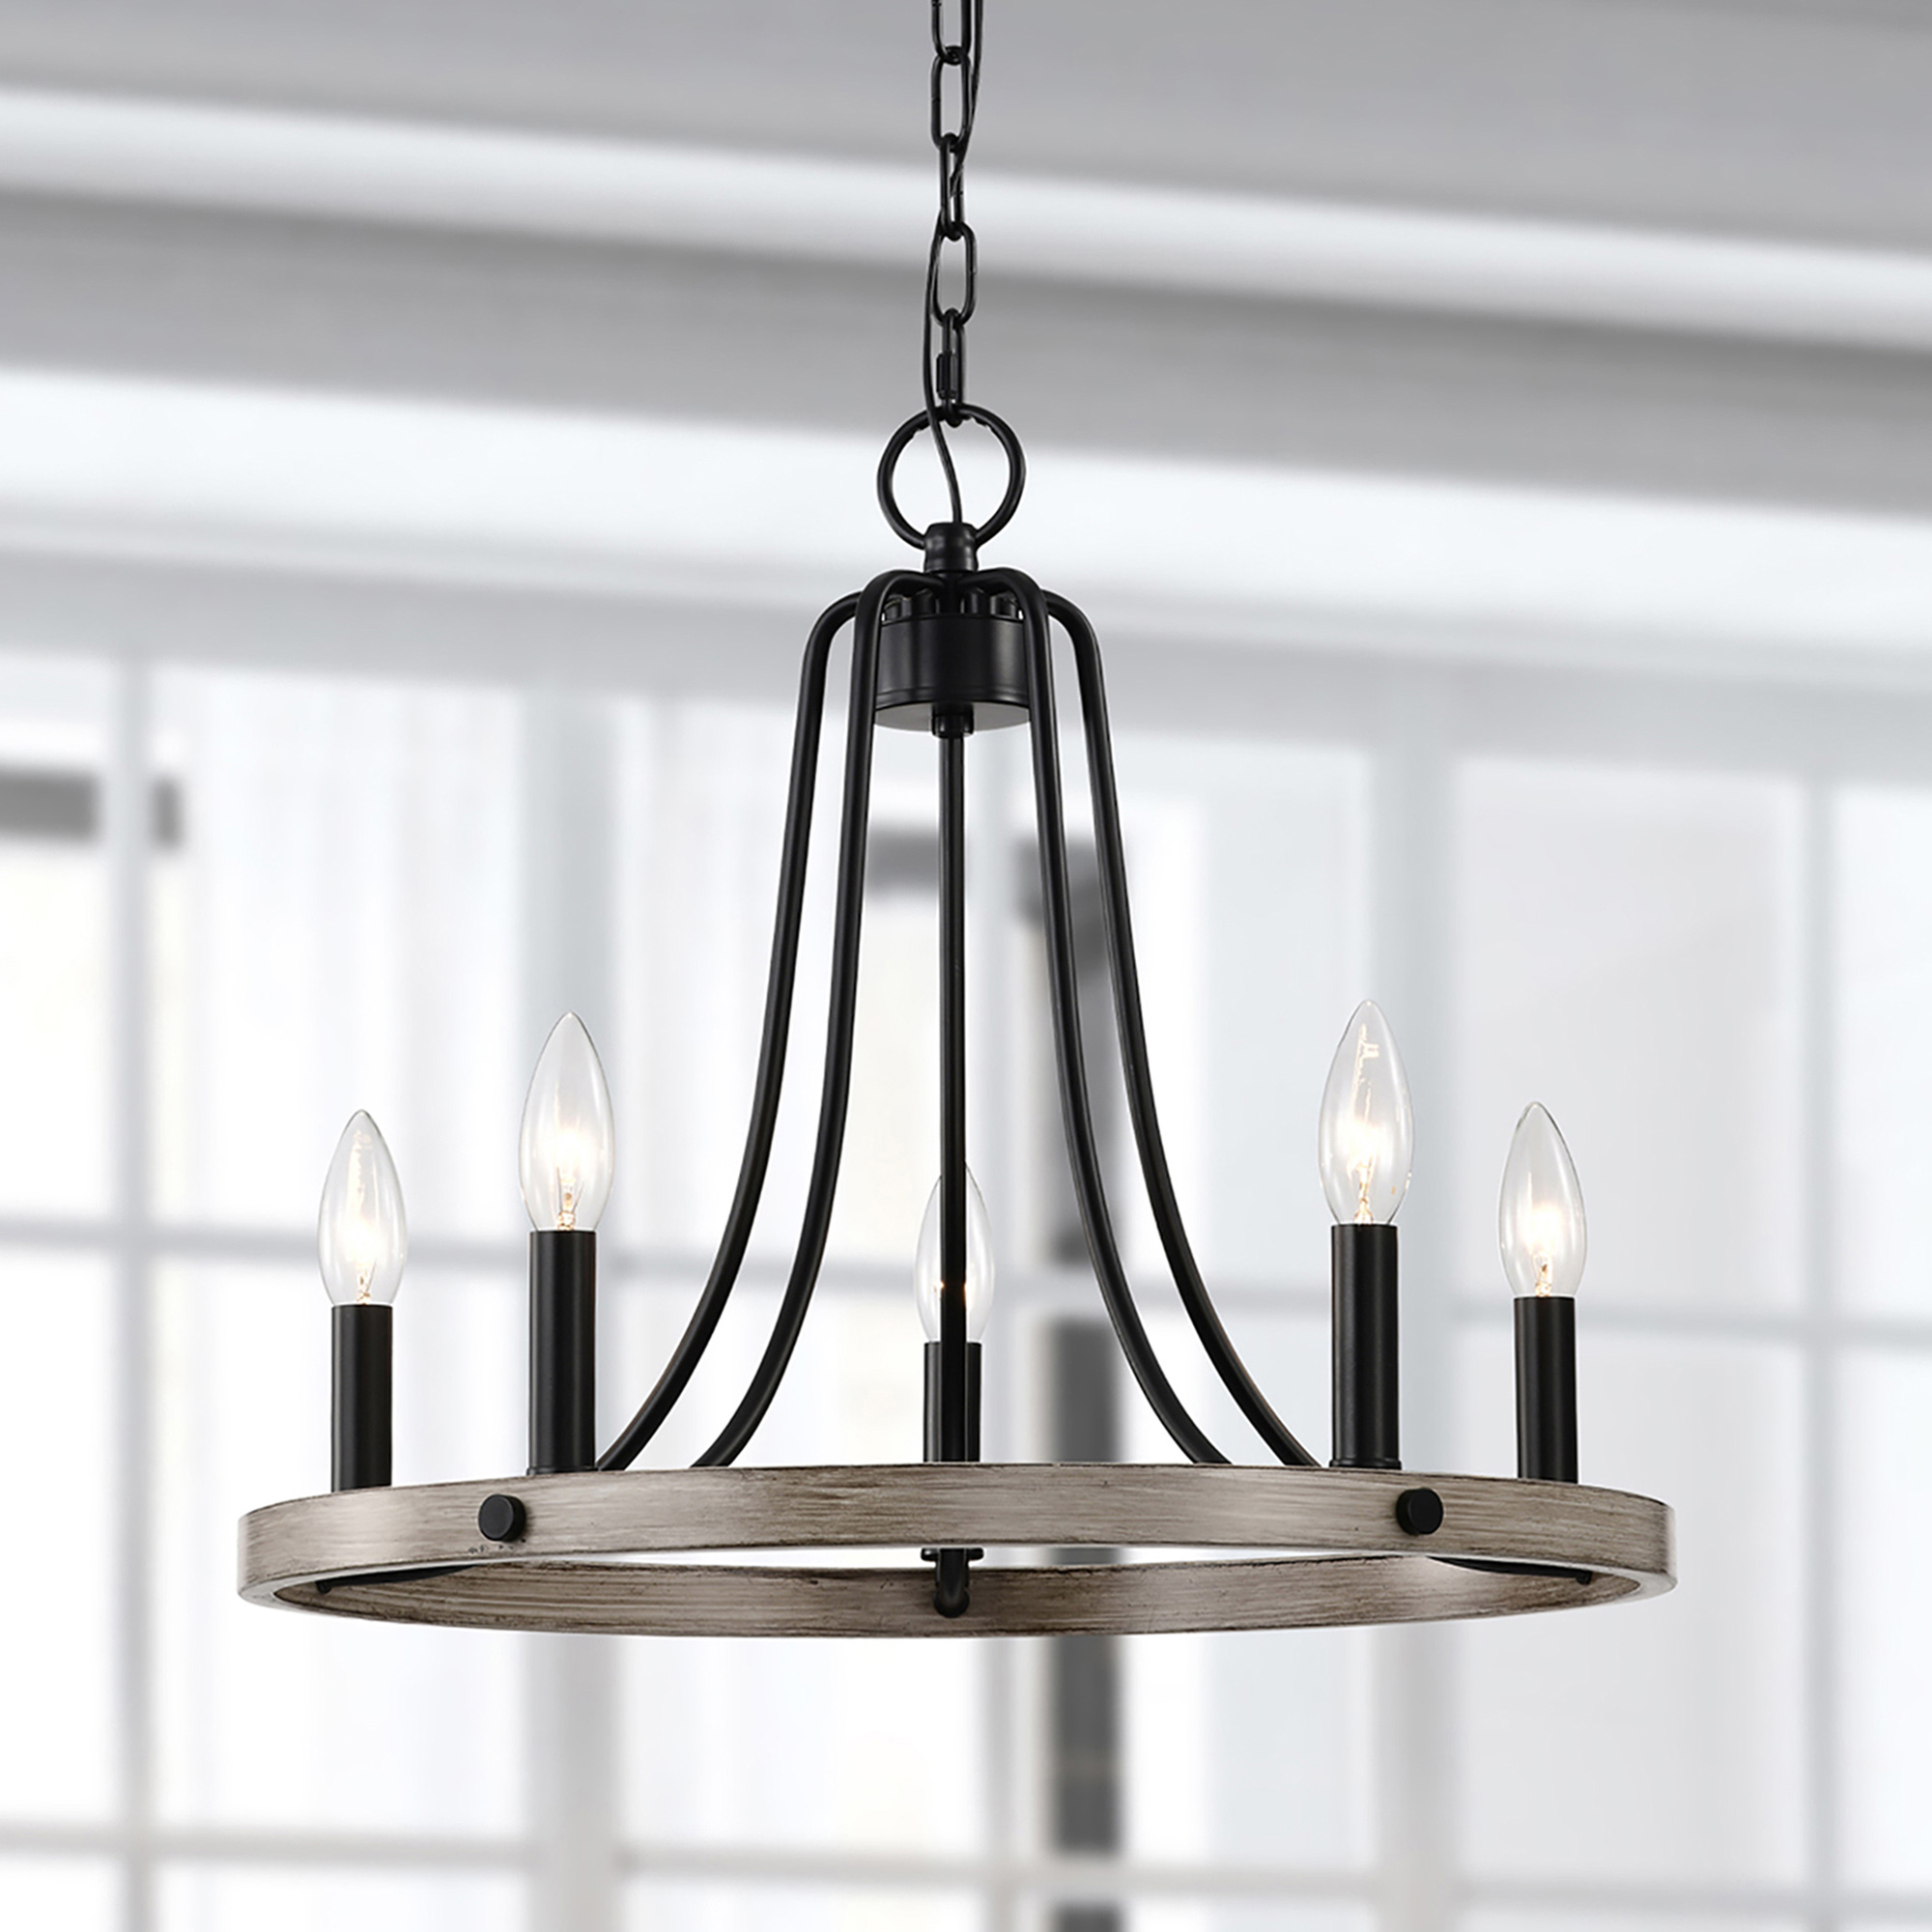 Ultan 20 in. 5-Light Indoor Matte Black and Faux Wood Grain Finish Chandelier with Light Kit